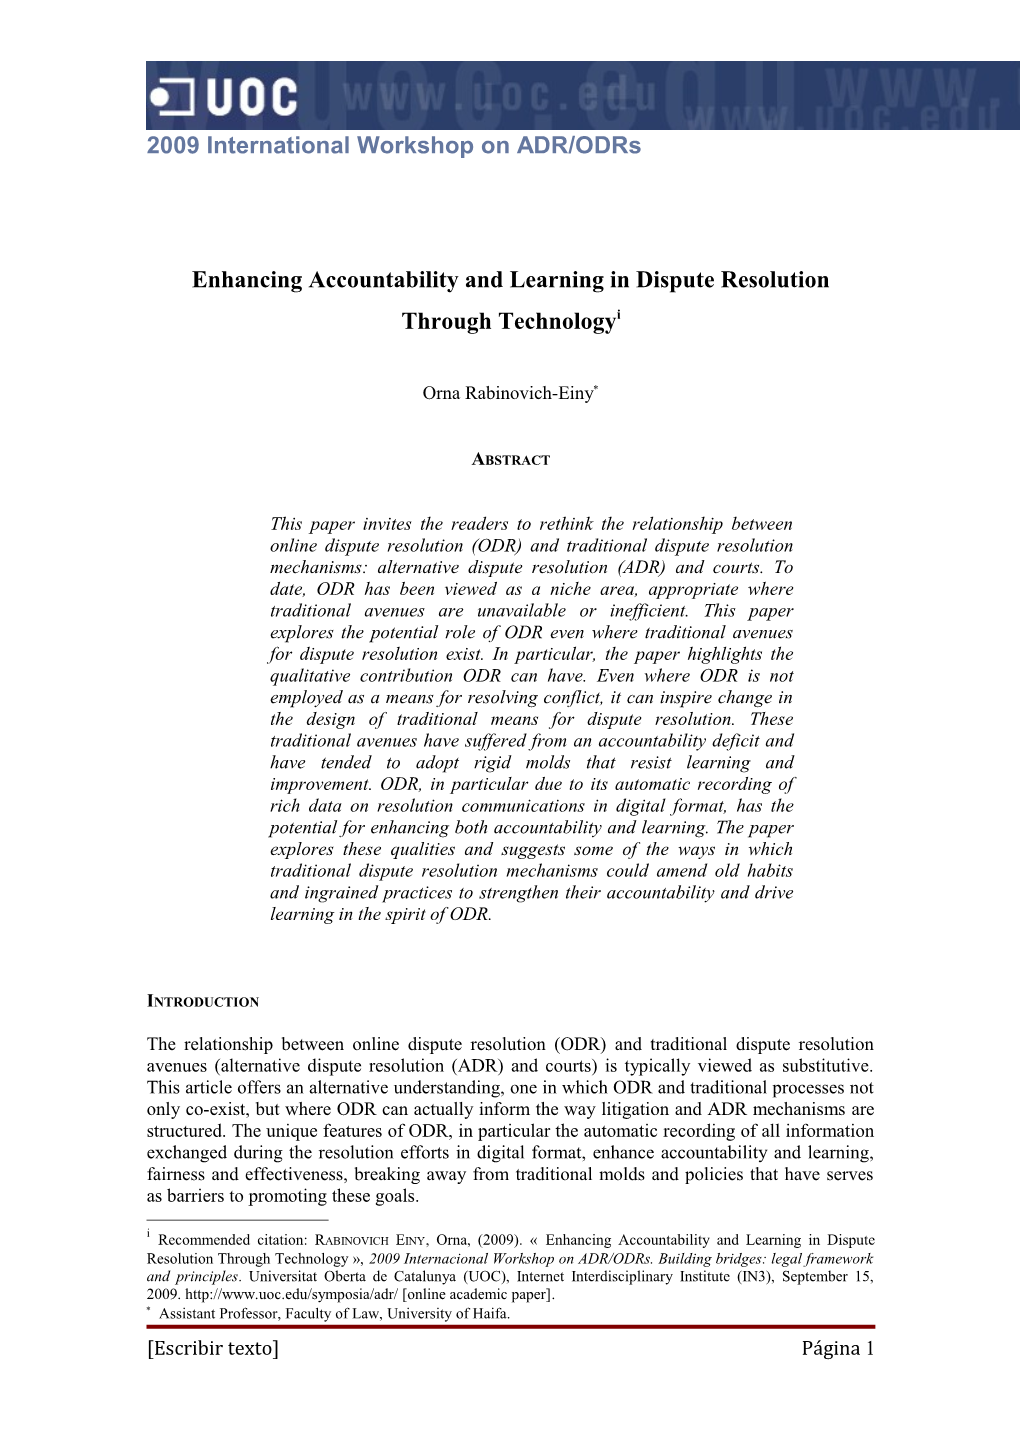 Enhancing Accountability and Learning in Dispute Resolution Through Technology I